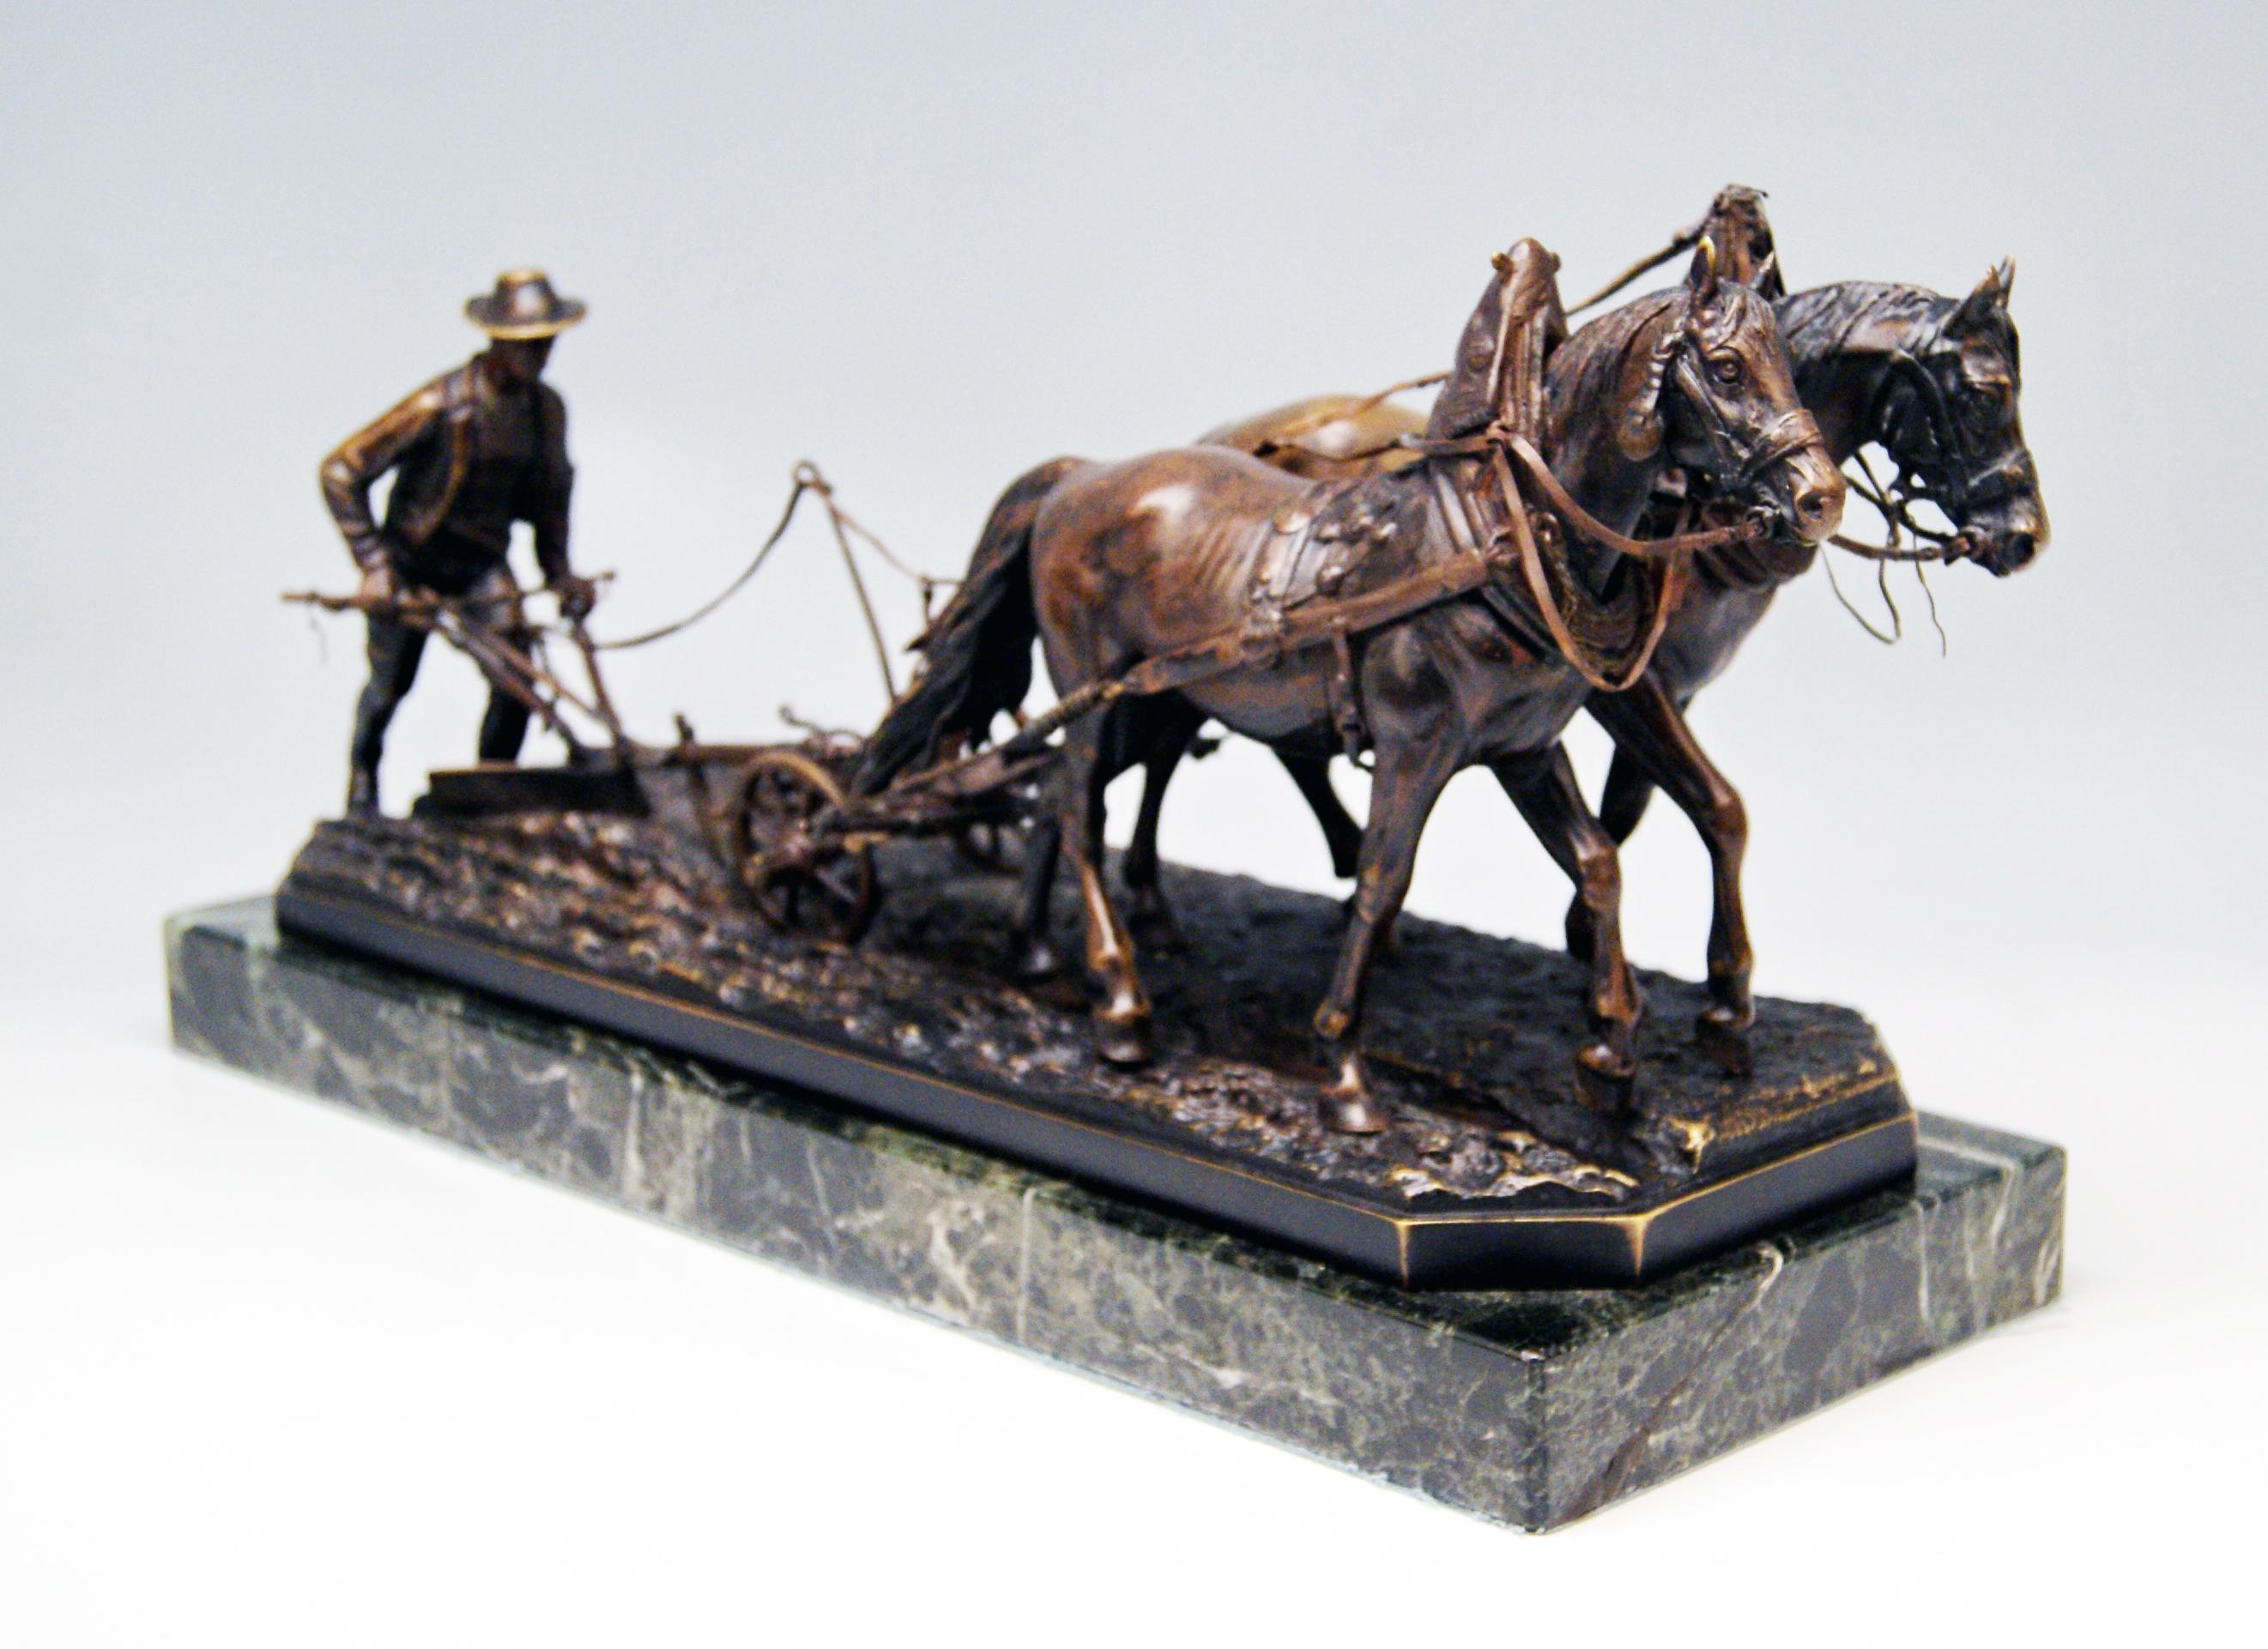 Vienna bronze plowing farmer with horse and cart by Carl Kauba.

Origin of manufactory: Vienna Bronze Manufactory

This finest rare bronze item is a gorgeous example of Viennese vintage bronze manufacturing ! 

Dating:  made circa